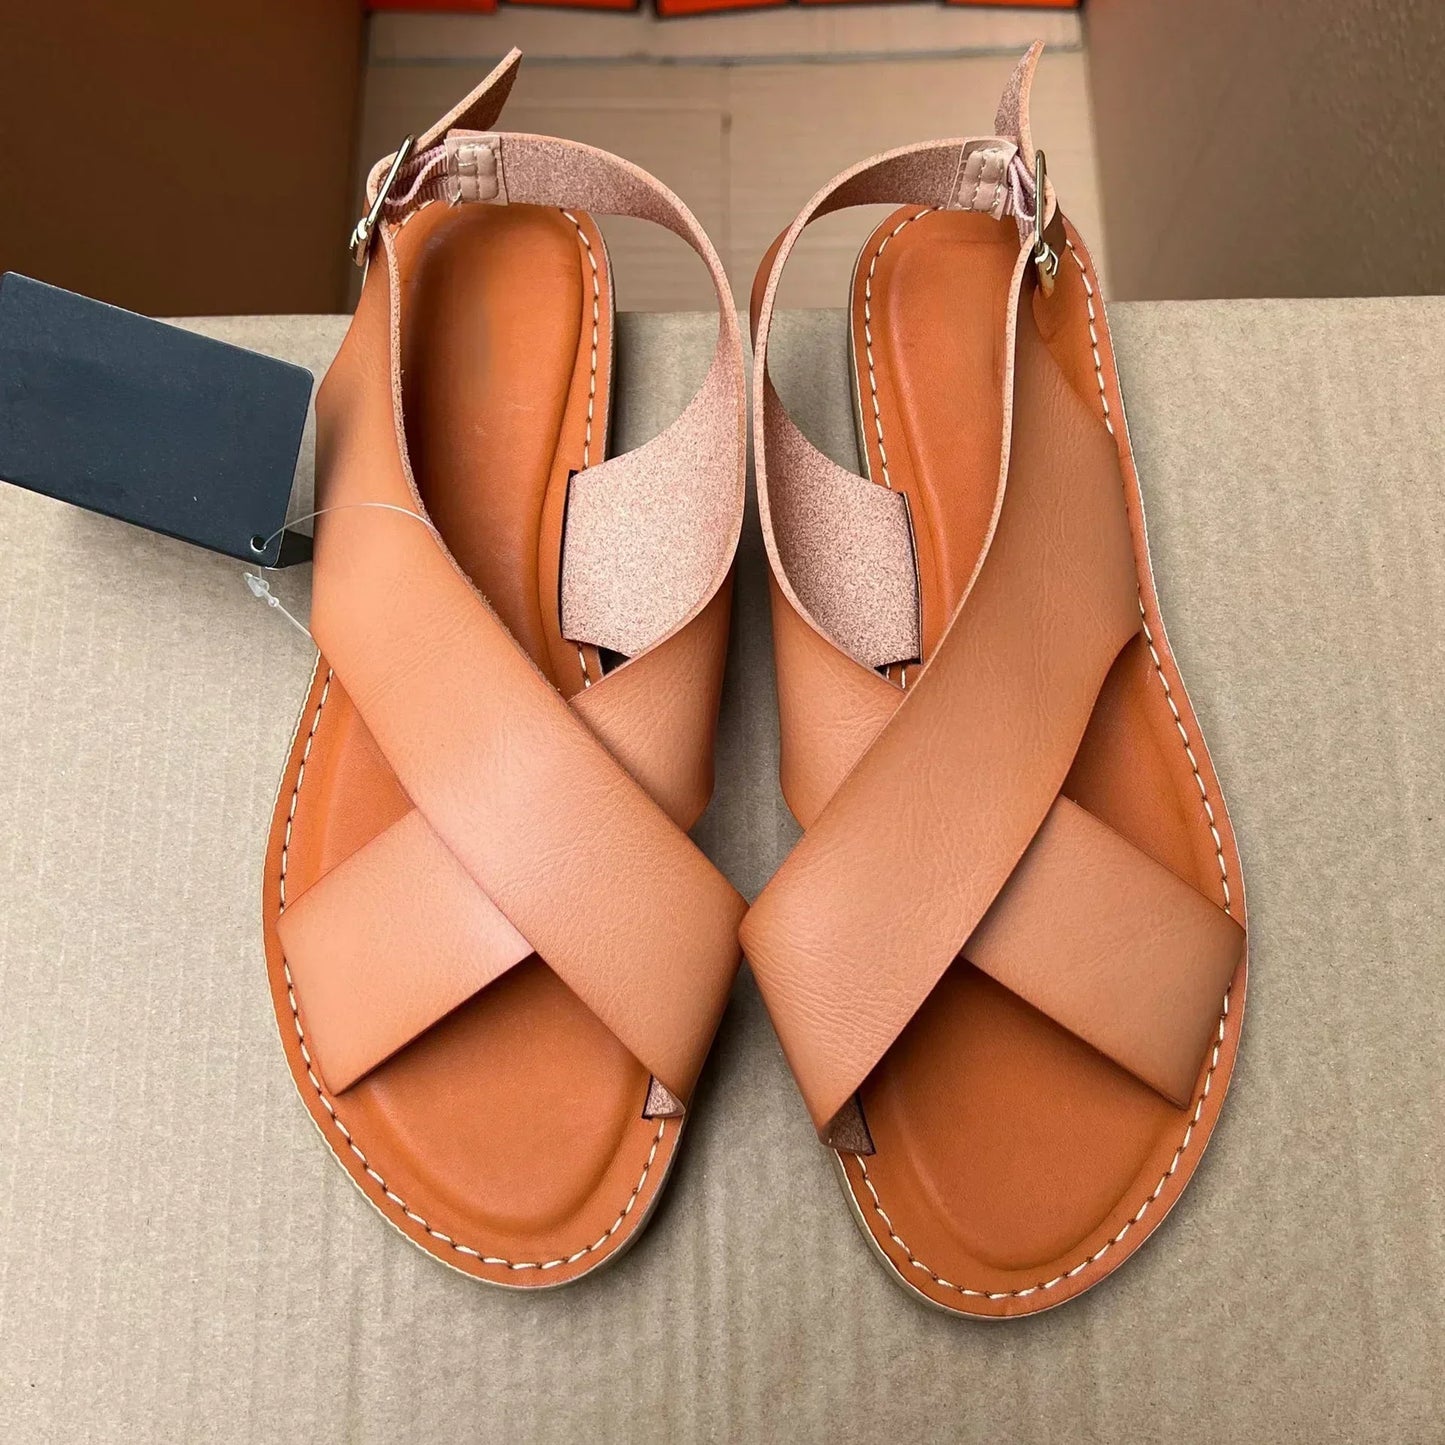 Gominglo - Summer Sandals Buckle Strap Flats, Solid Peep Toe Design